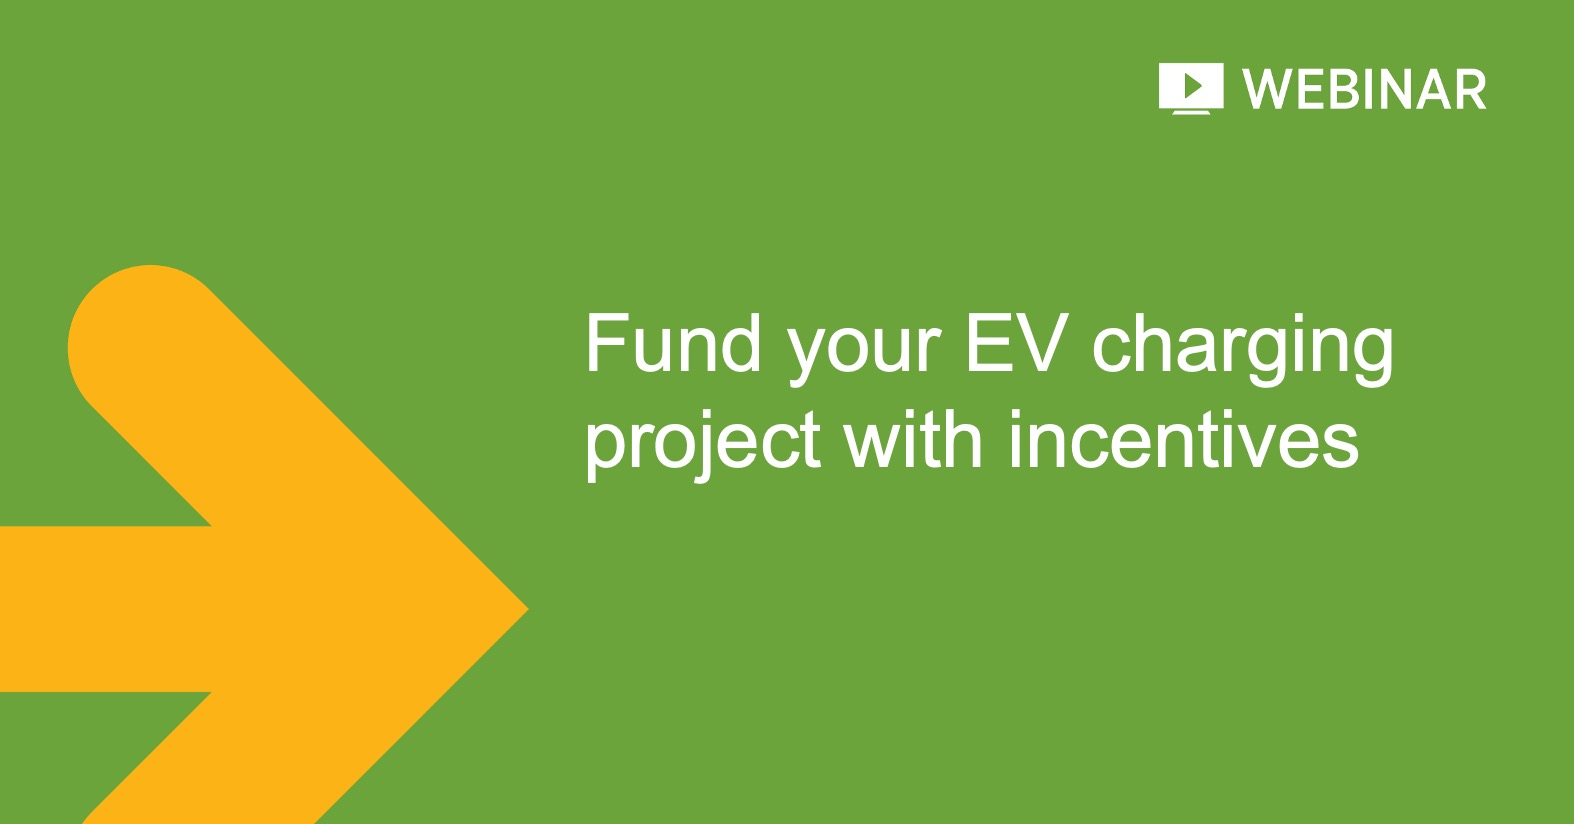 Webinar: Fund your EV charging project with incentives 